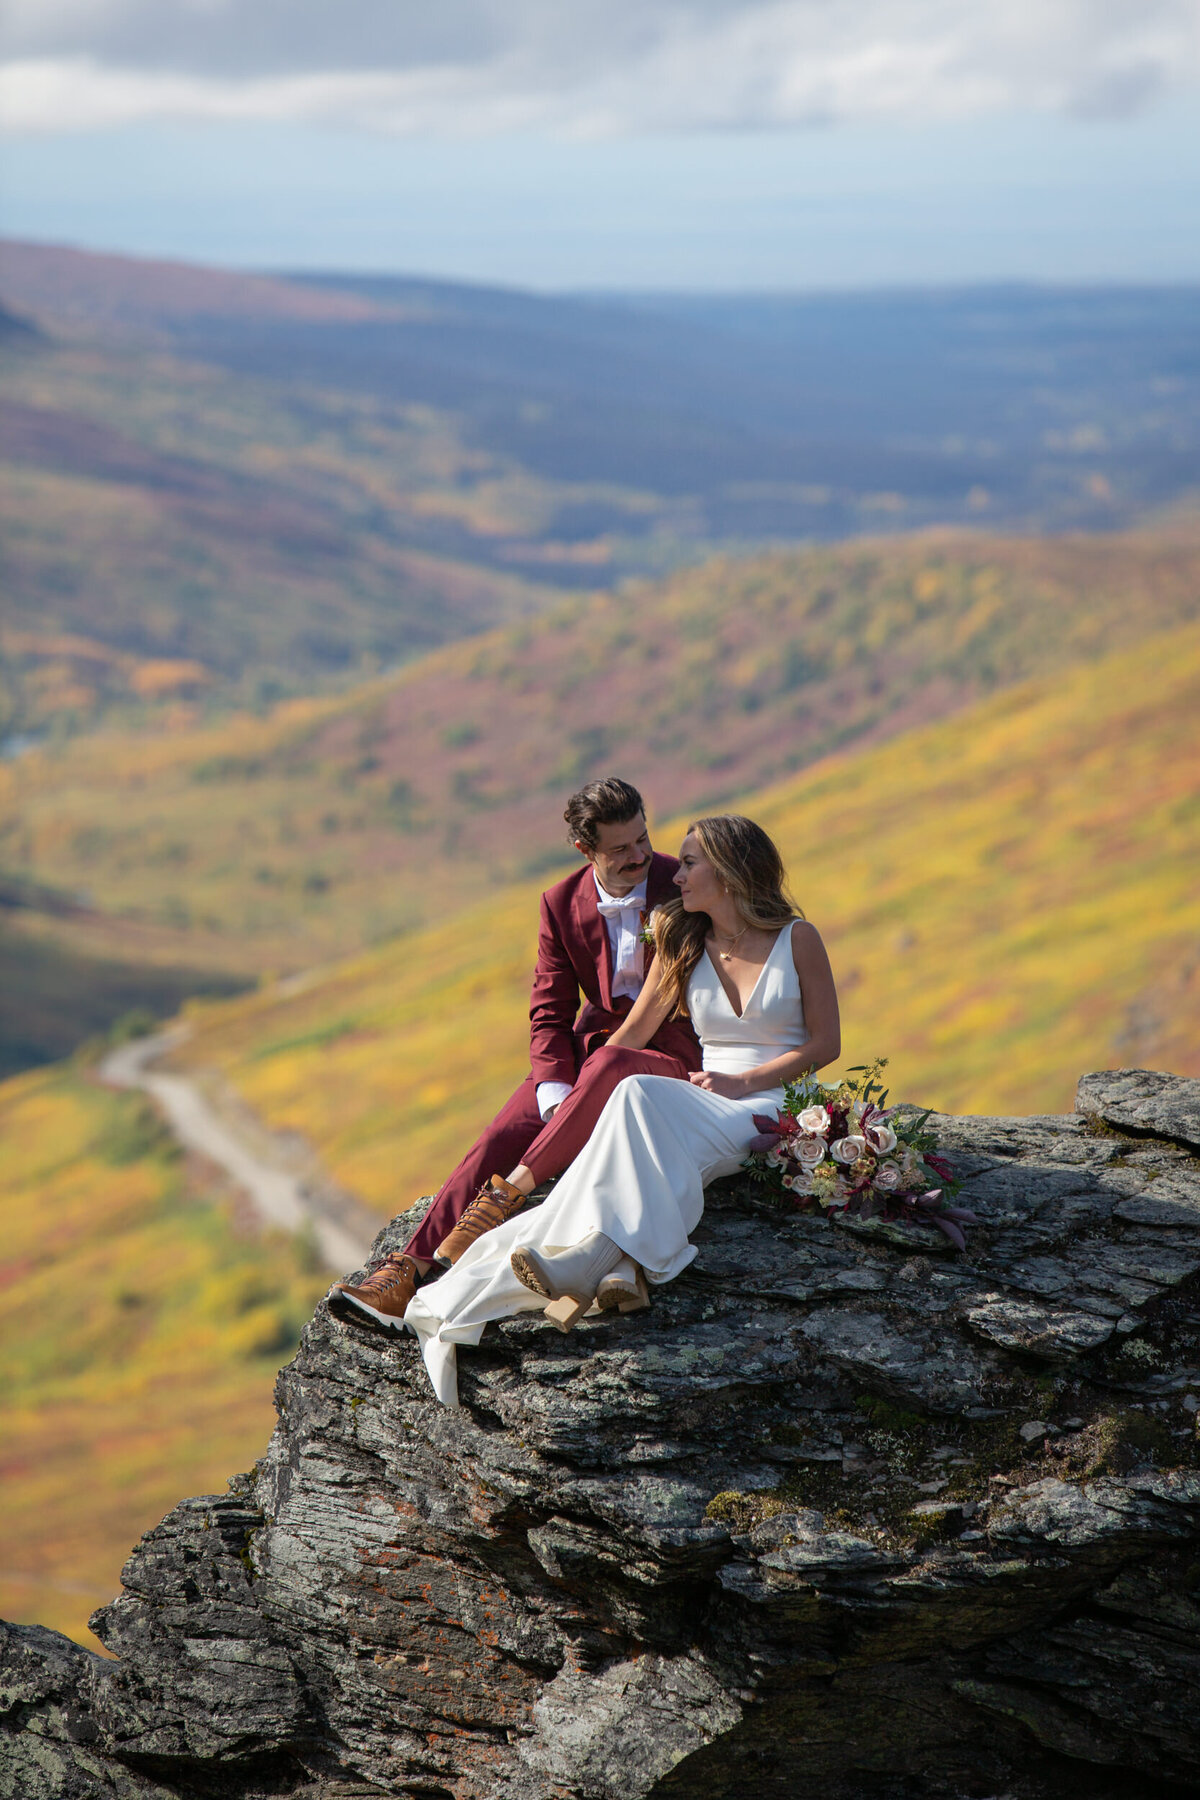 A bride and groom sit together on a rock with a flower bouquet resting next to the bride's leg.